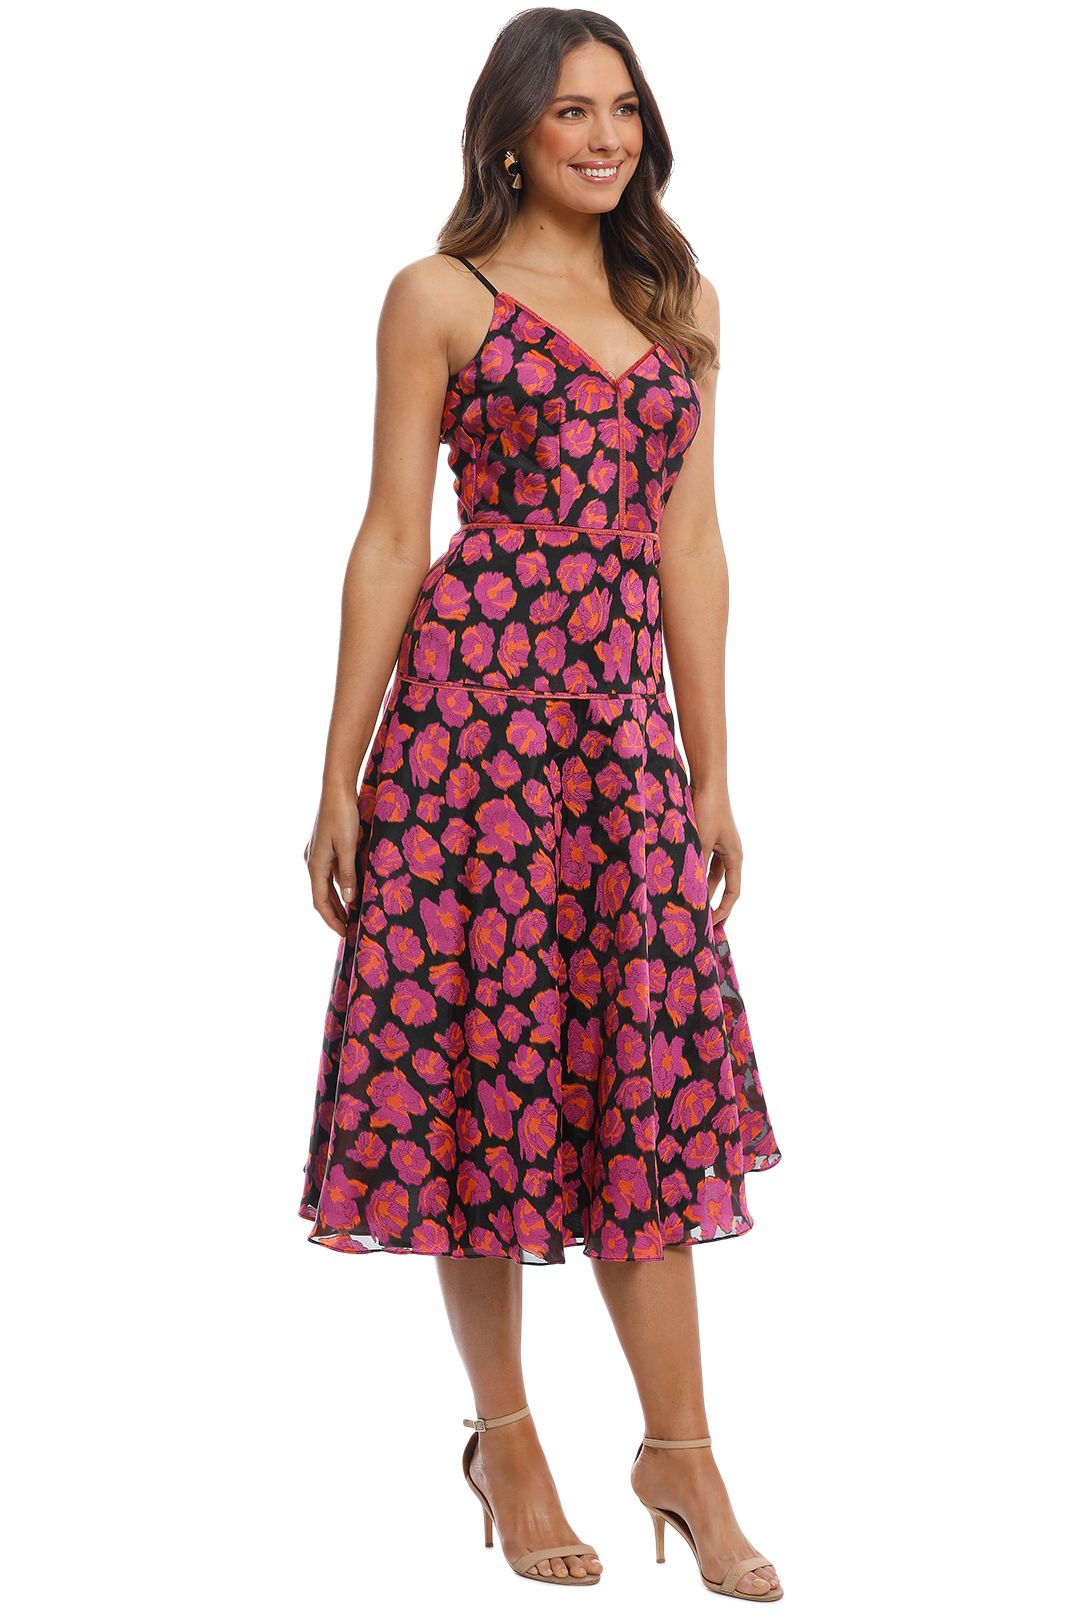 Moss and Spy - Lysander Dress - Pink Multi - Side